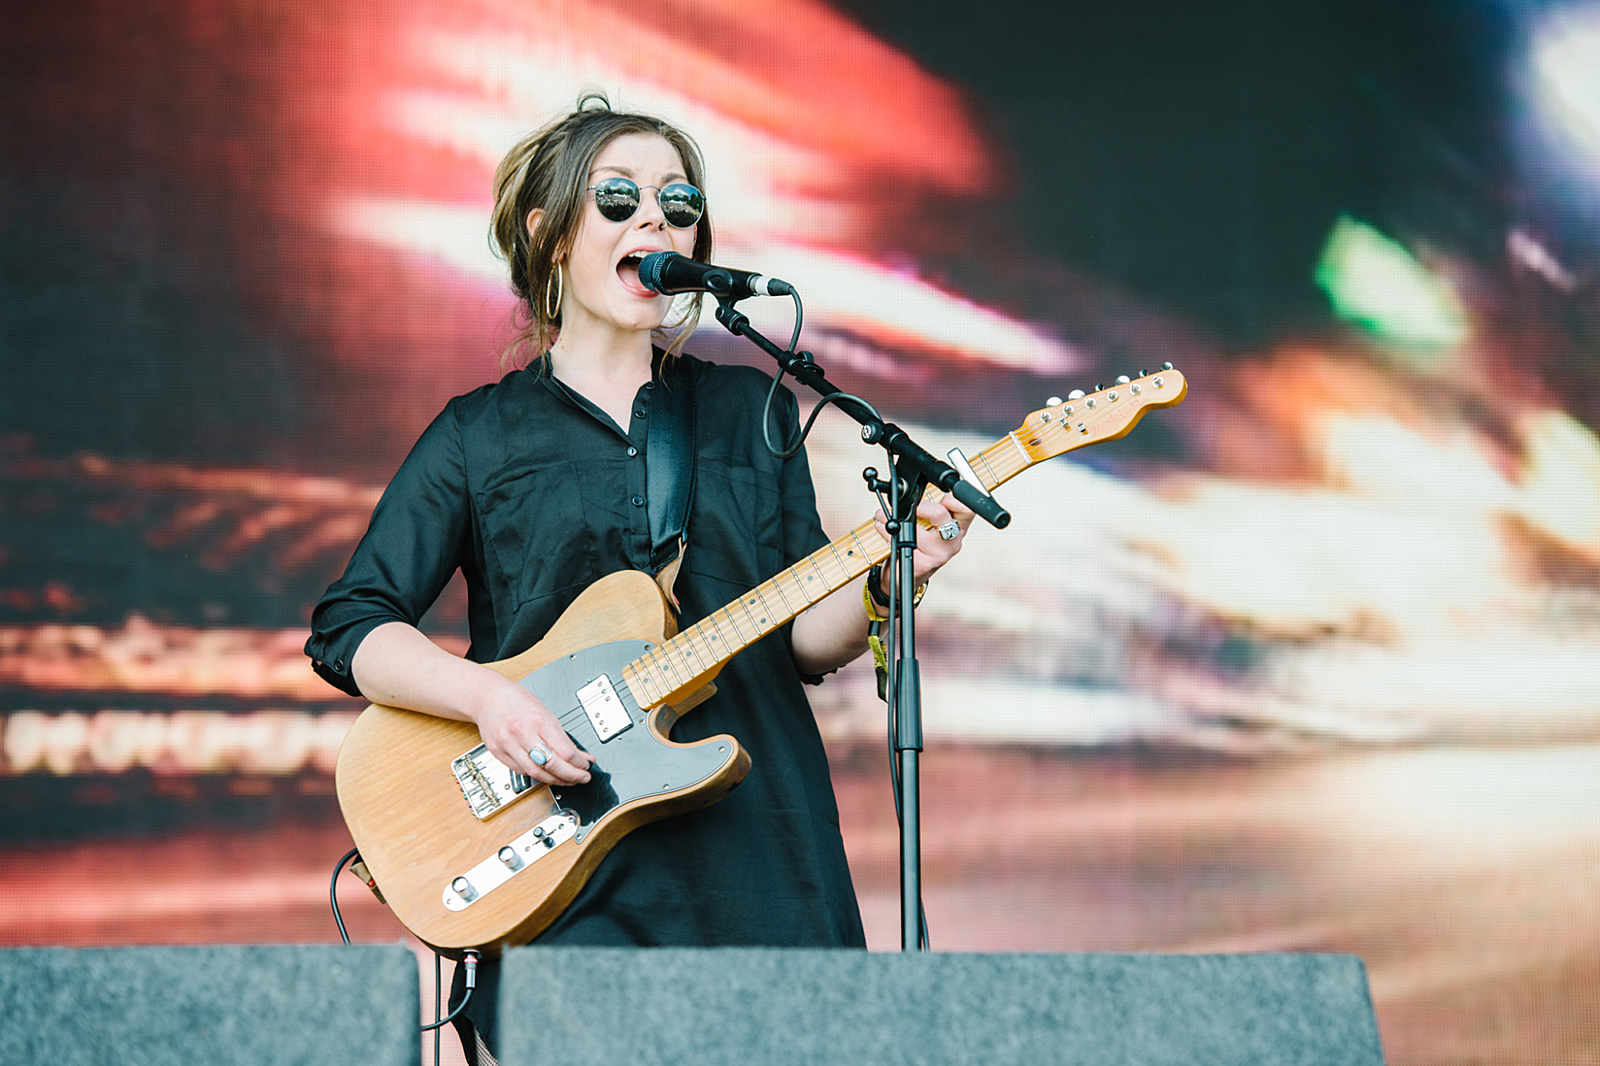 Honeyblood, The Magic Gang, Chastity Belt and more join Bestival 2017